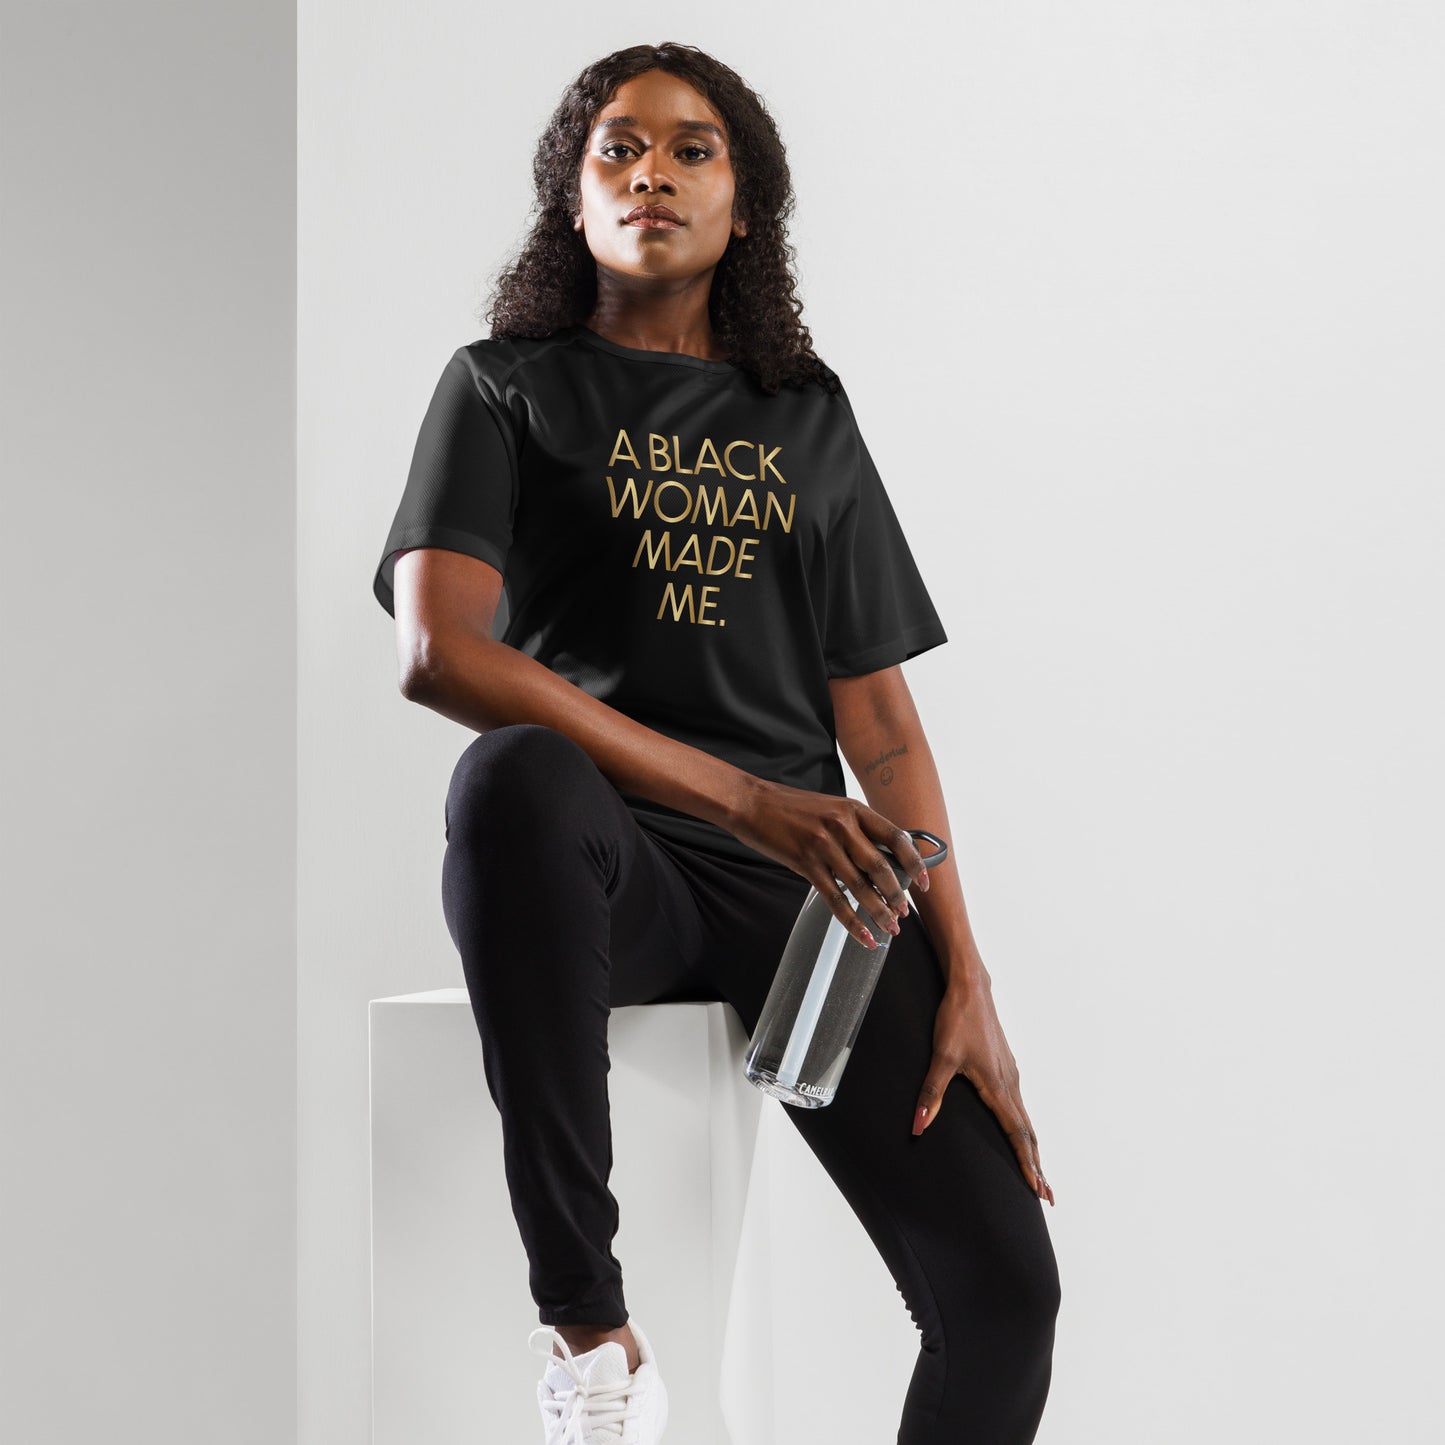 Unisex sports jersey - A Black Woman Made Me